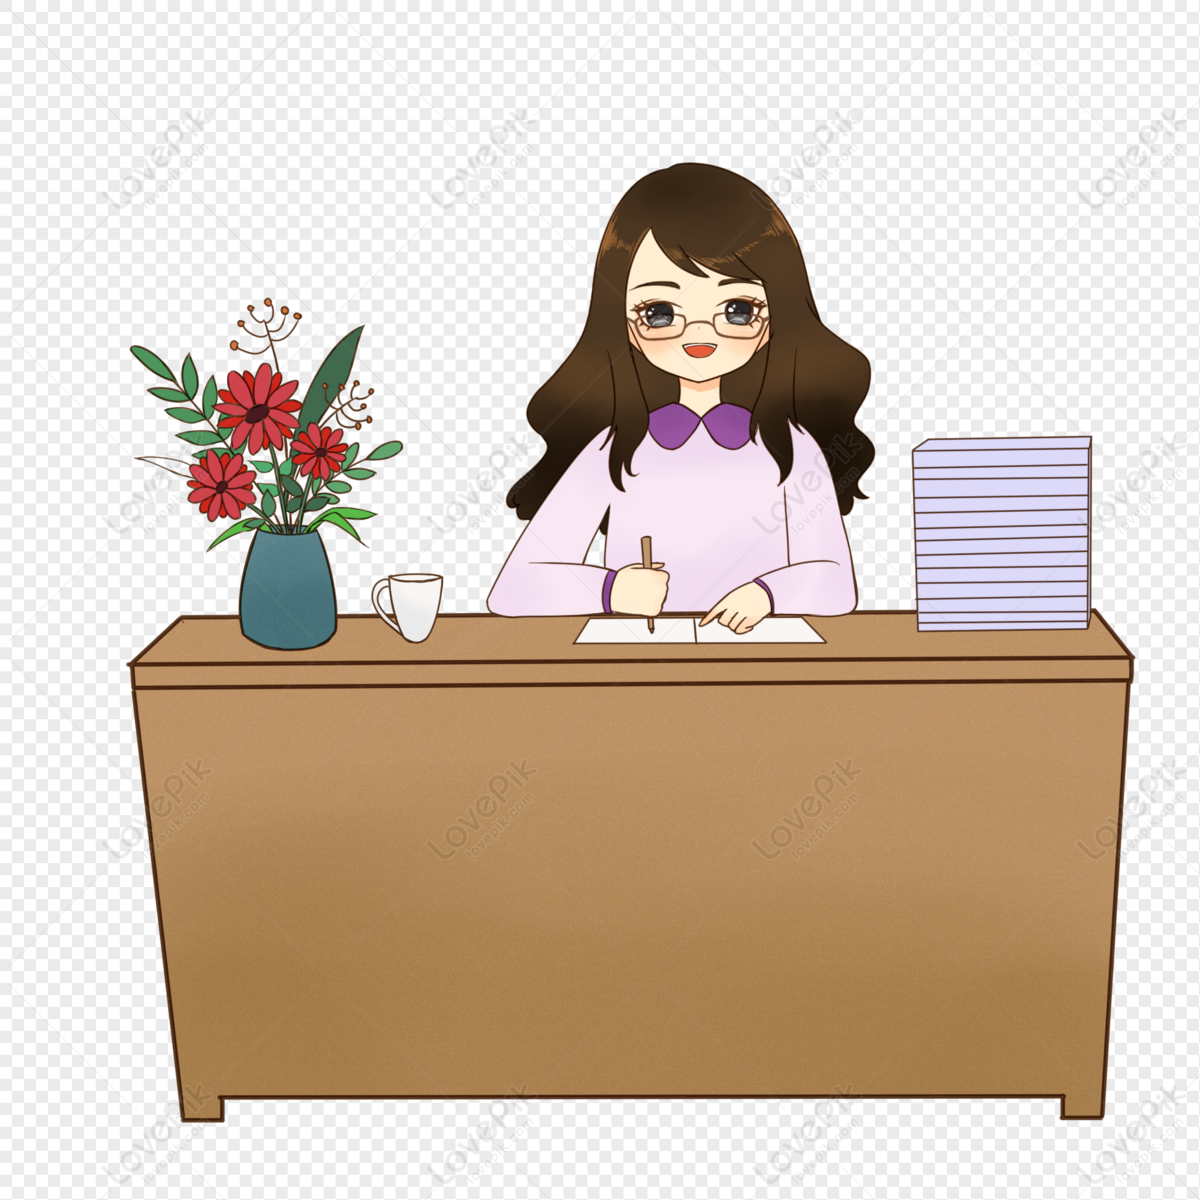 Teacher who corrects the assignment, female teacher, assignments, correcting homework png image